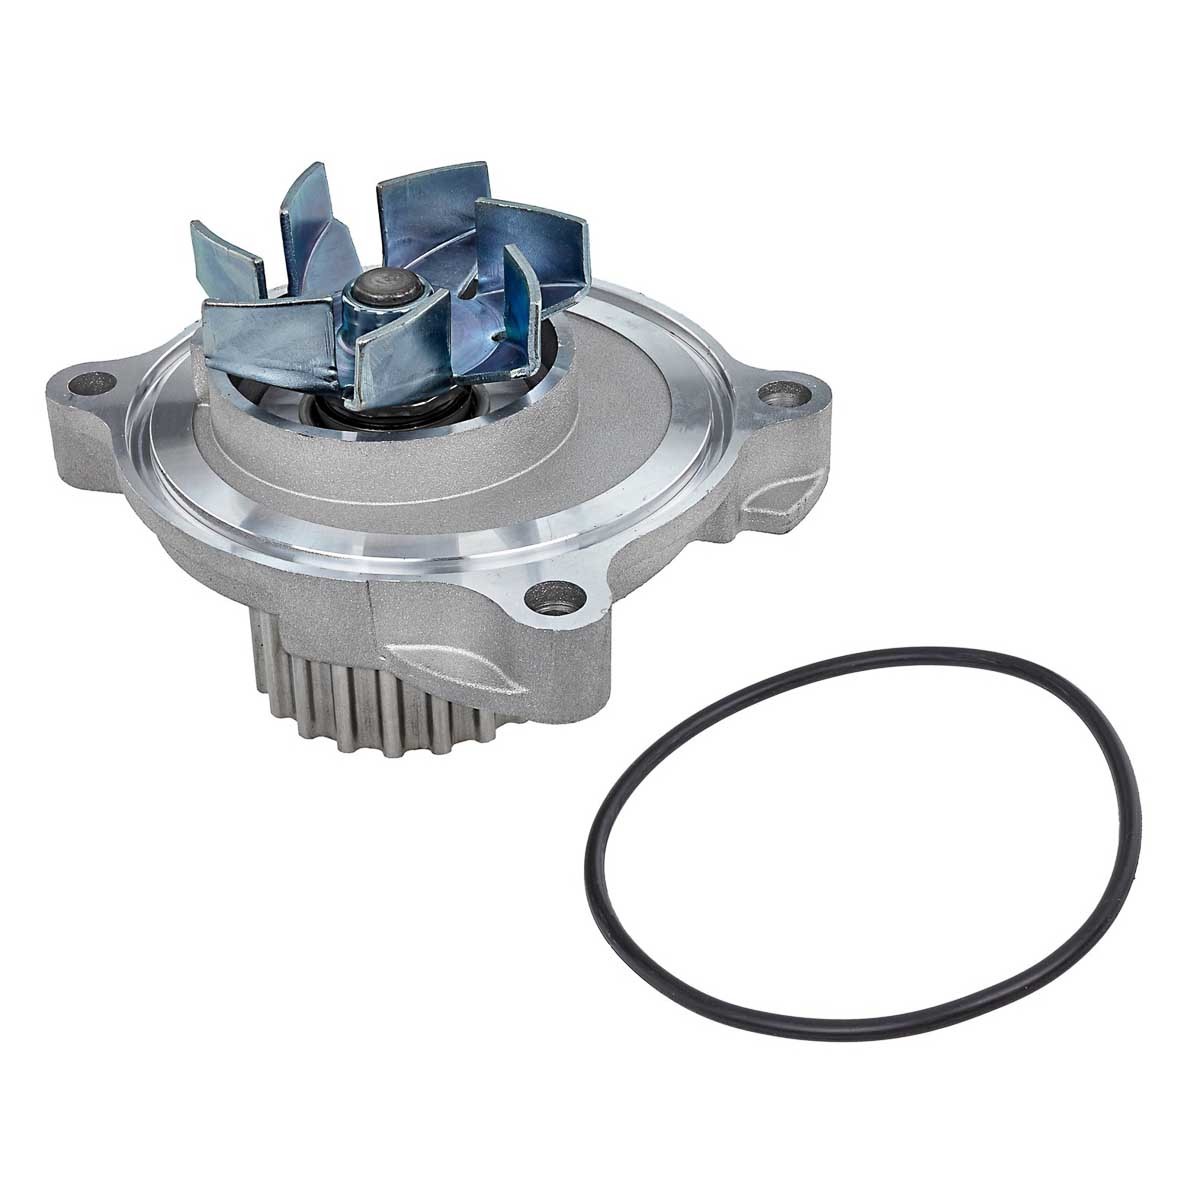 MWP0131HD MEYLE Number of Teeth: 20, with seal, Metal, Quality, for timing belt drive Water pumps 113 012 0042/HD buy